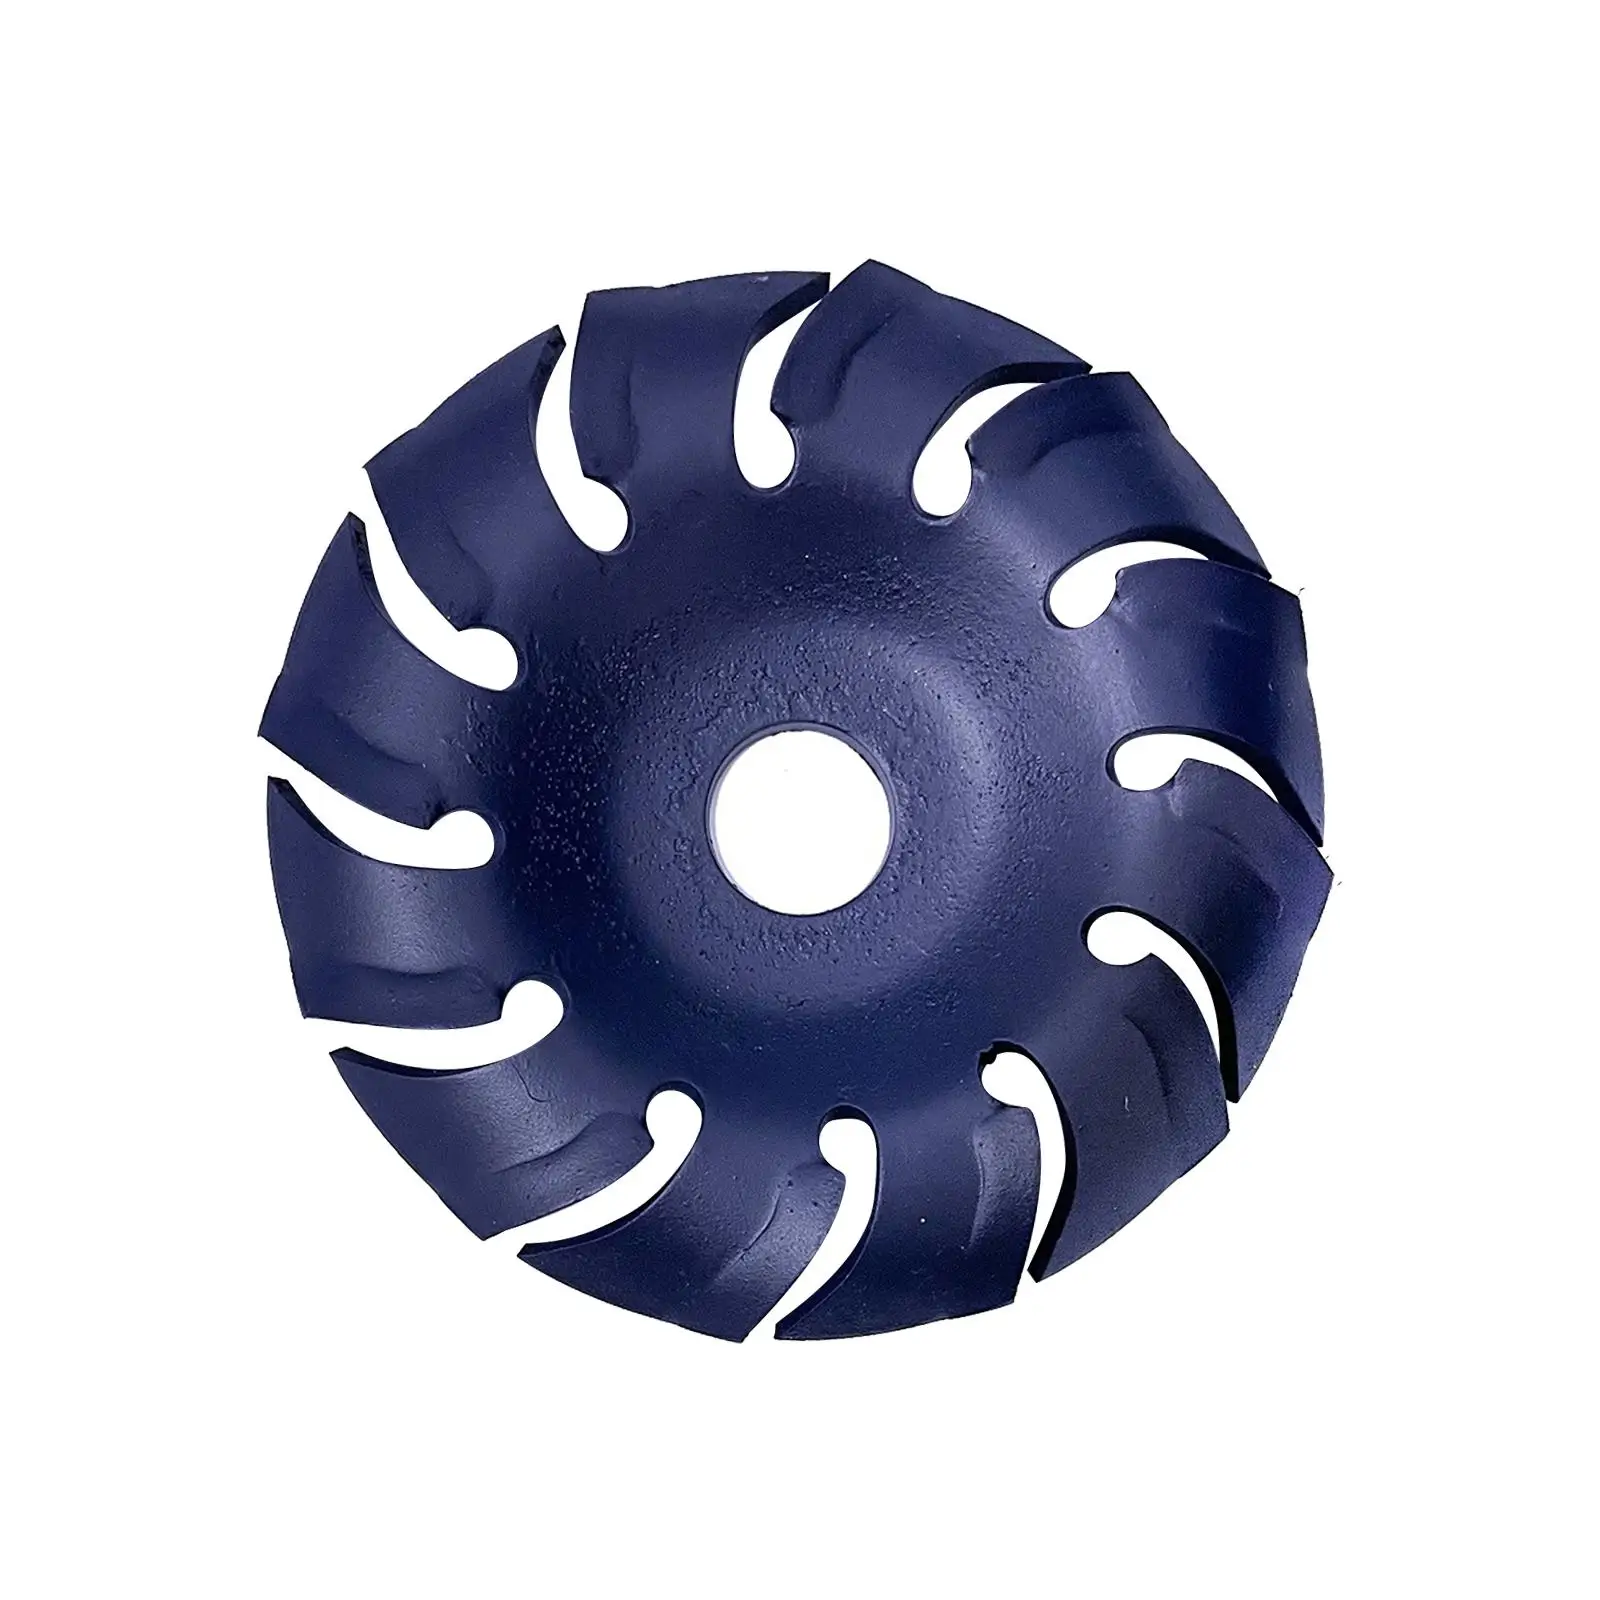 Grinding Wheel Shaping Disc Sanding Carving Disc Polishing Sanding Disc Polishing Buffing Wheel Angle Grinder Disc for Polishing